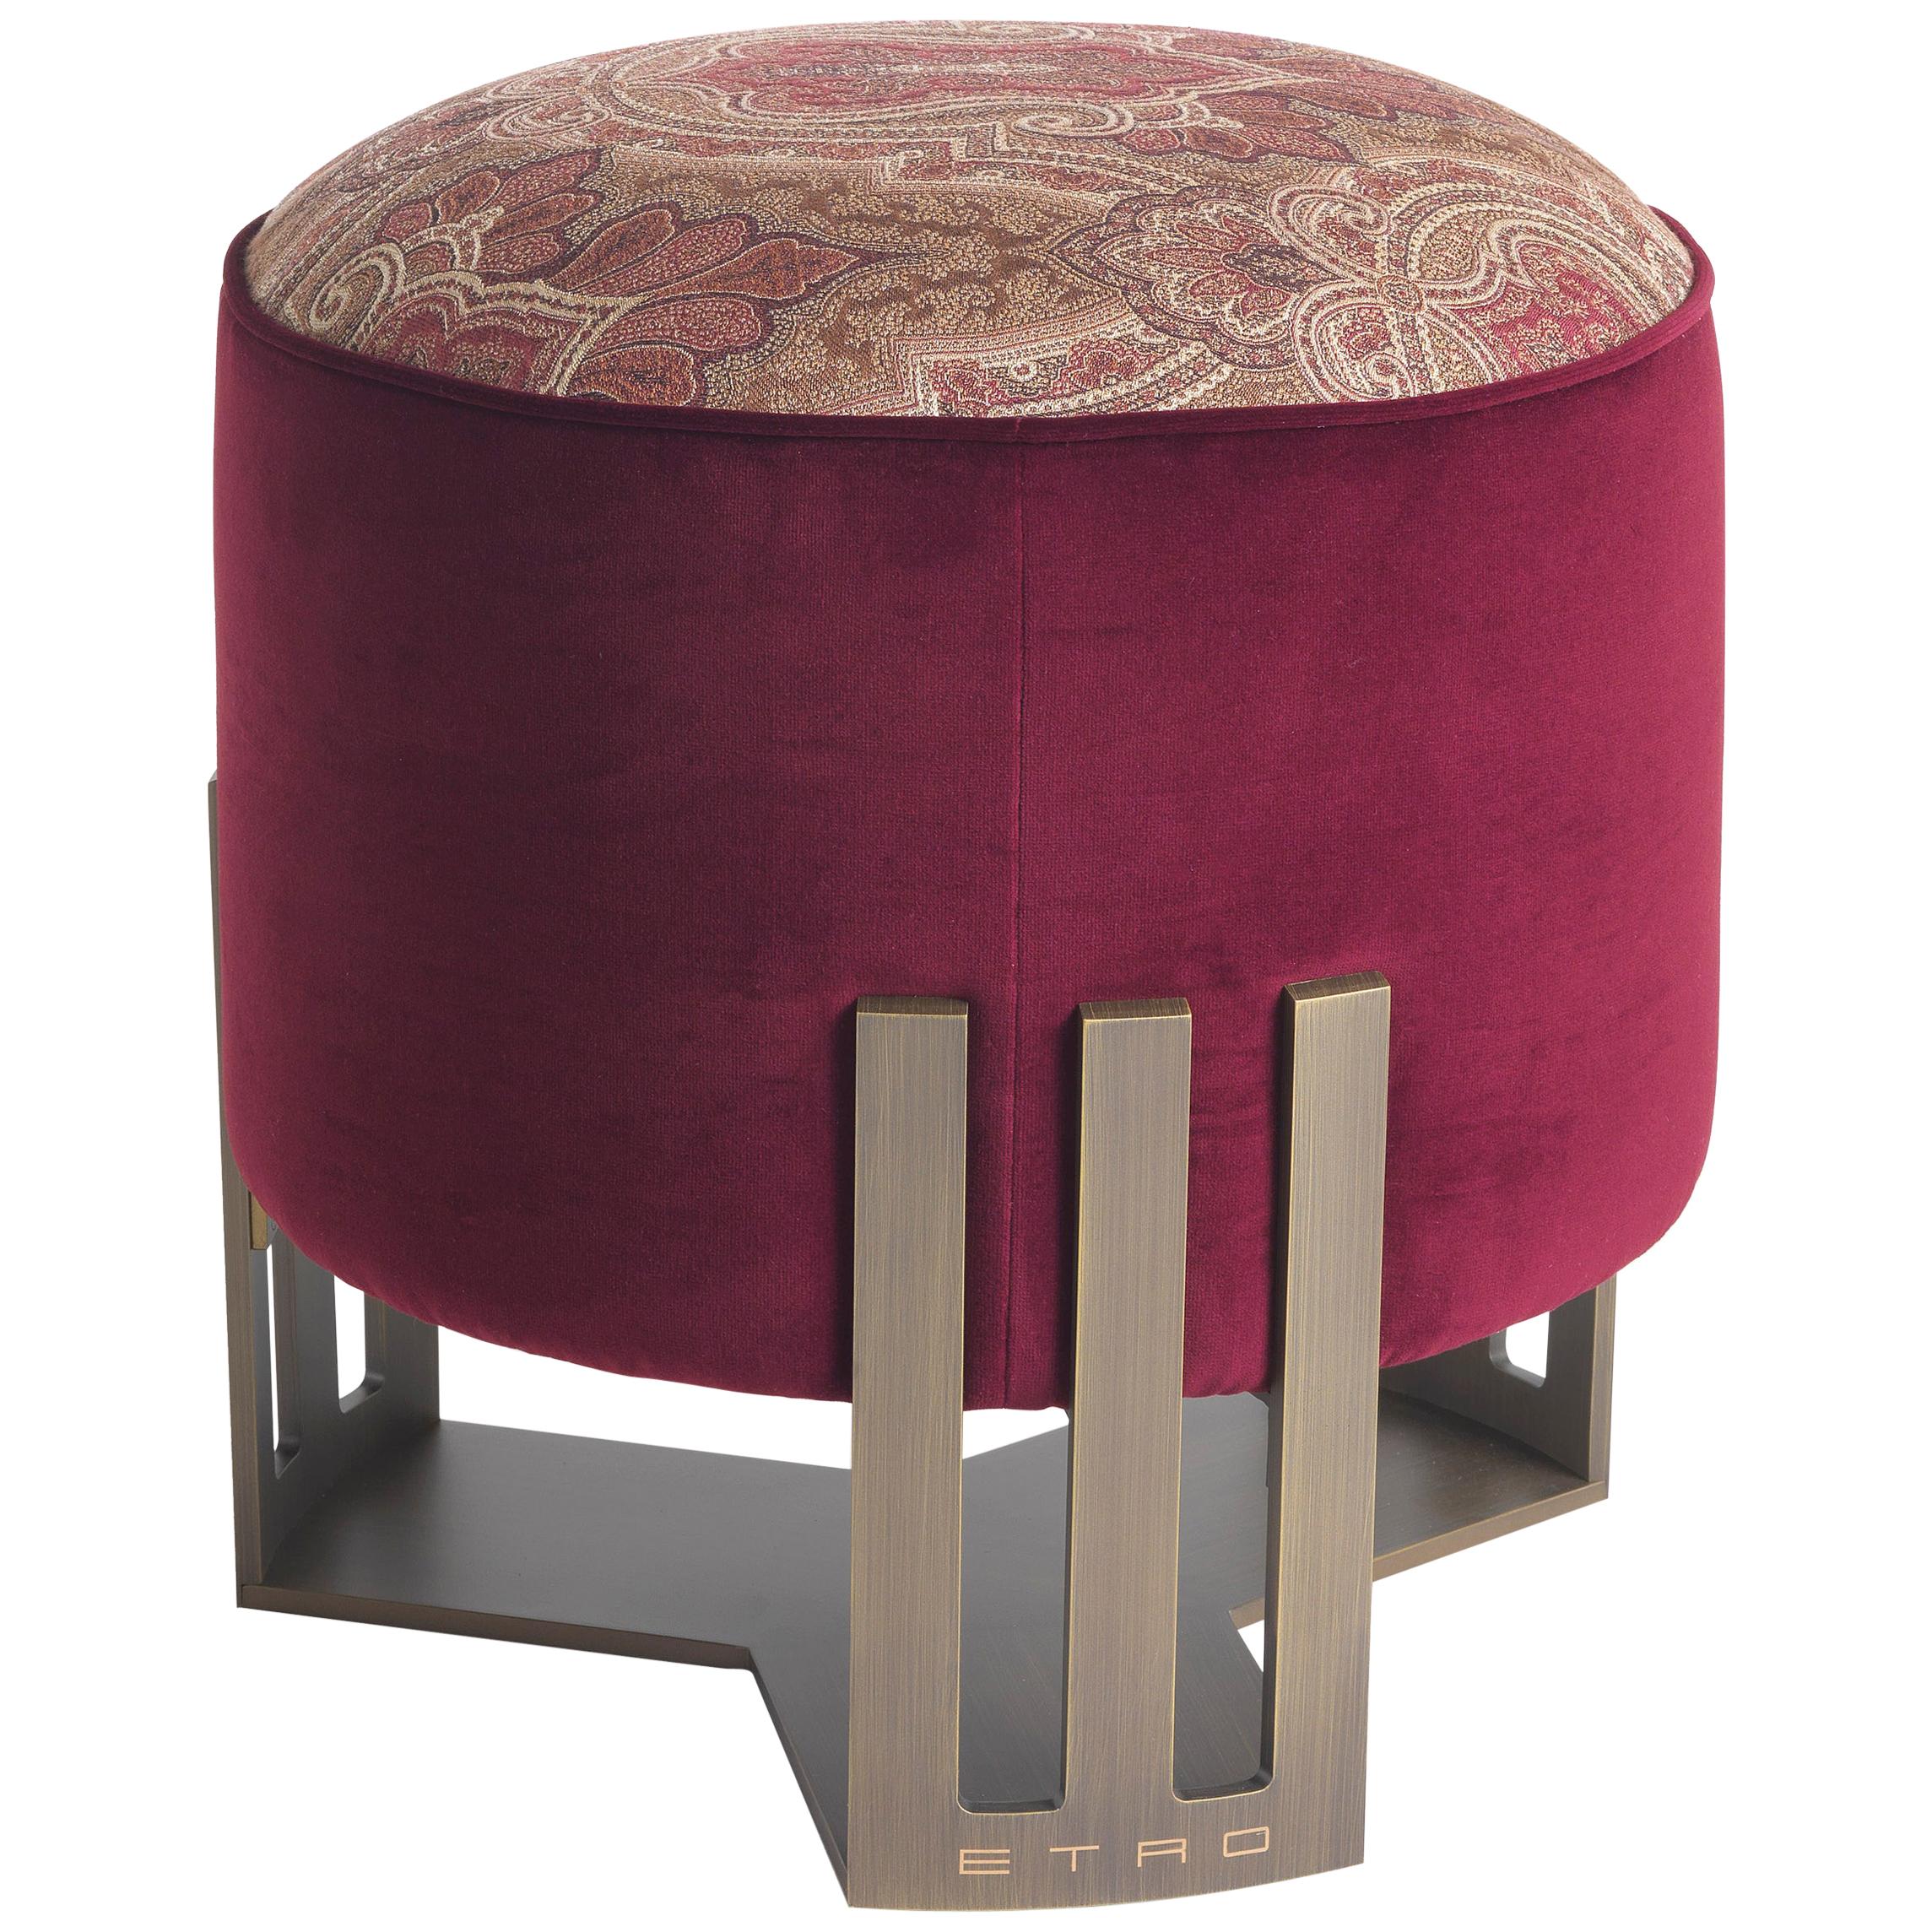 21st Century Klee Pouf in Paisley Print and Metal by Etro Home Interiors For Sale